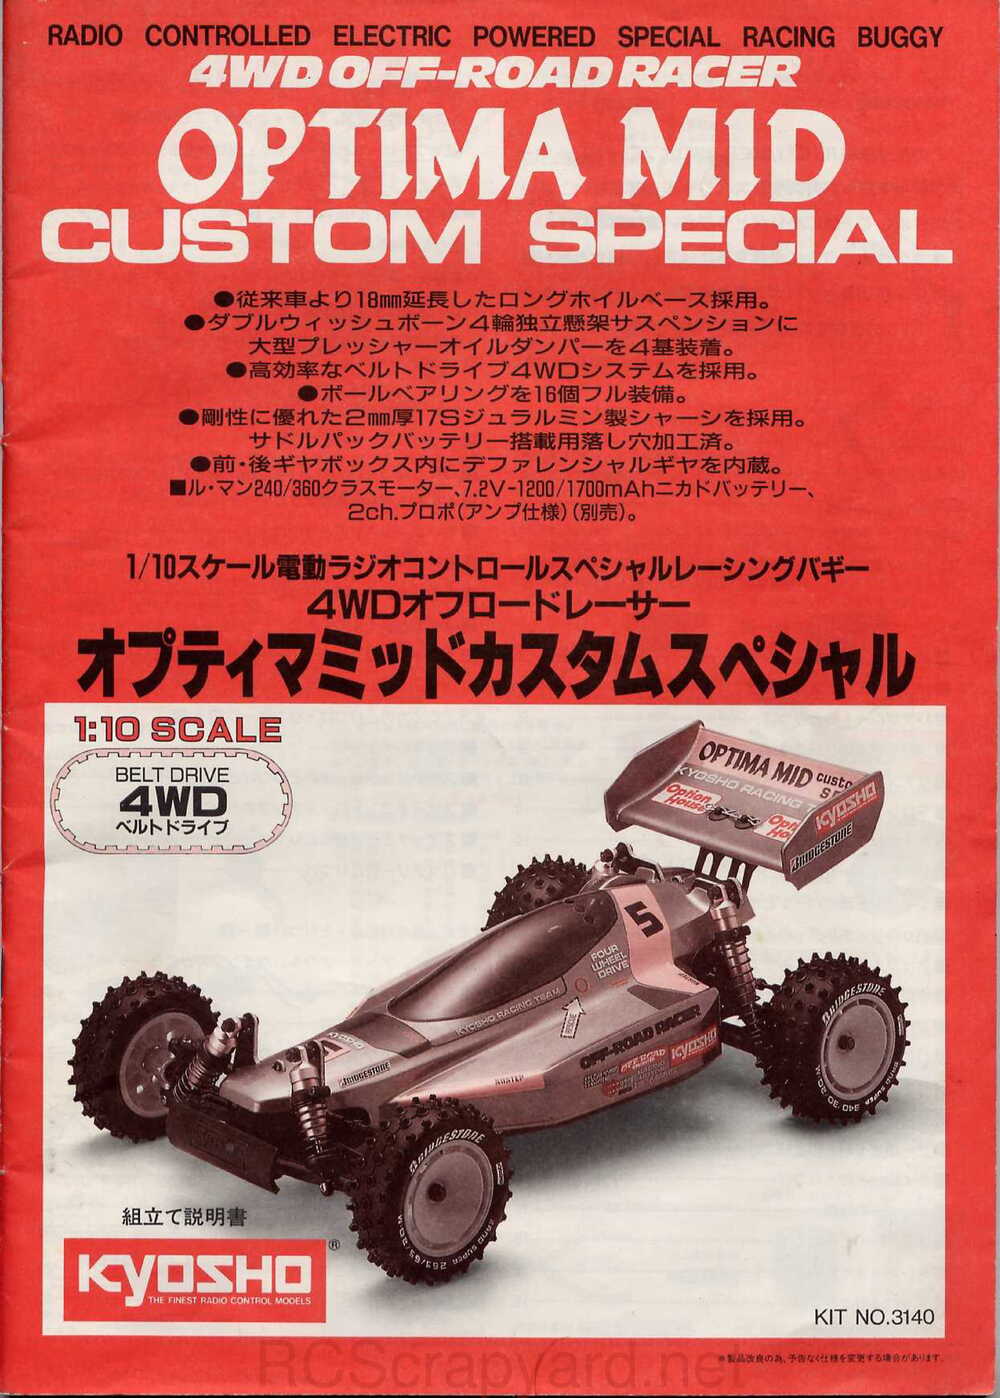 Kyosho - 3140 - Optima-Mid Custom Special - Manual - Page 01